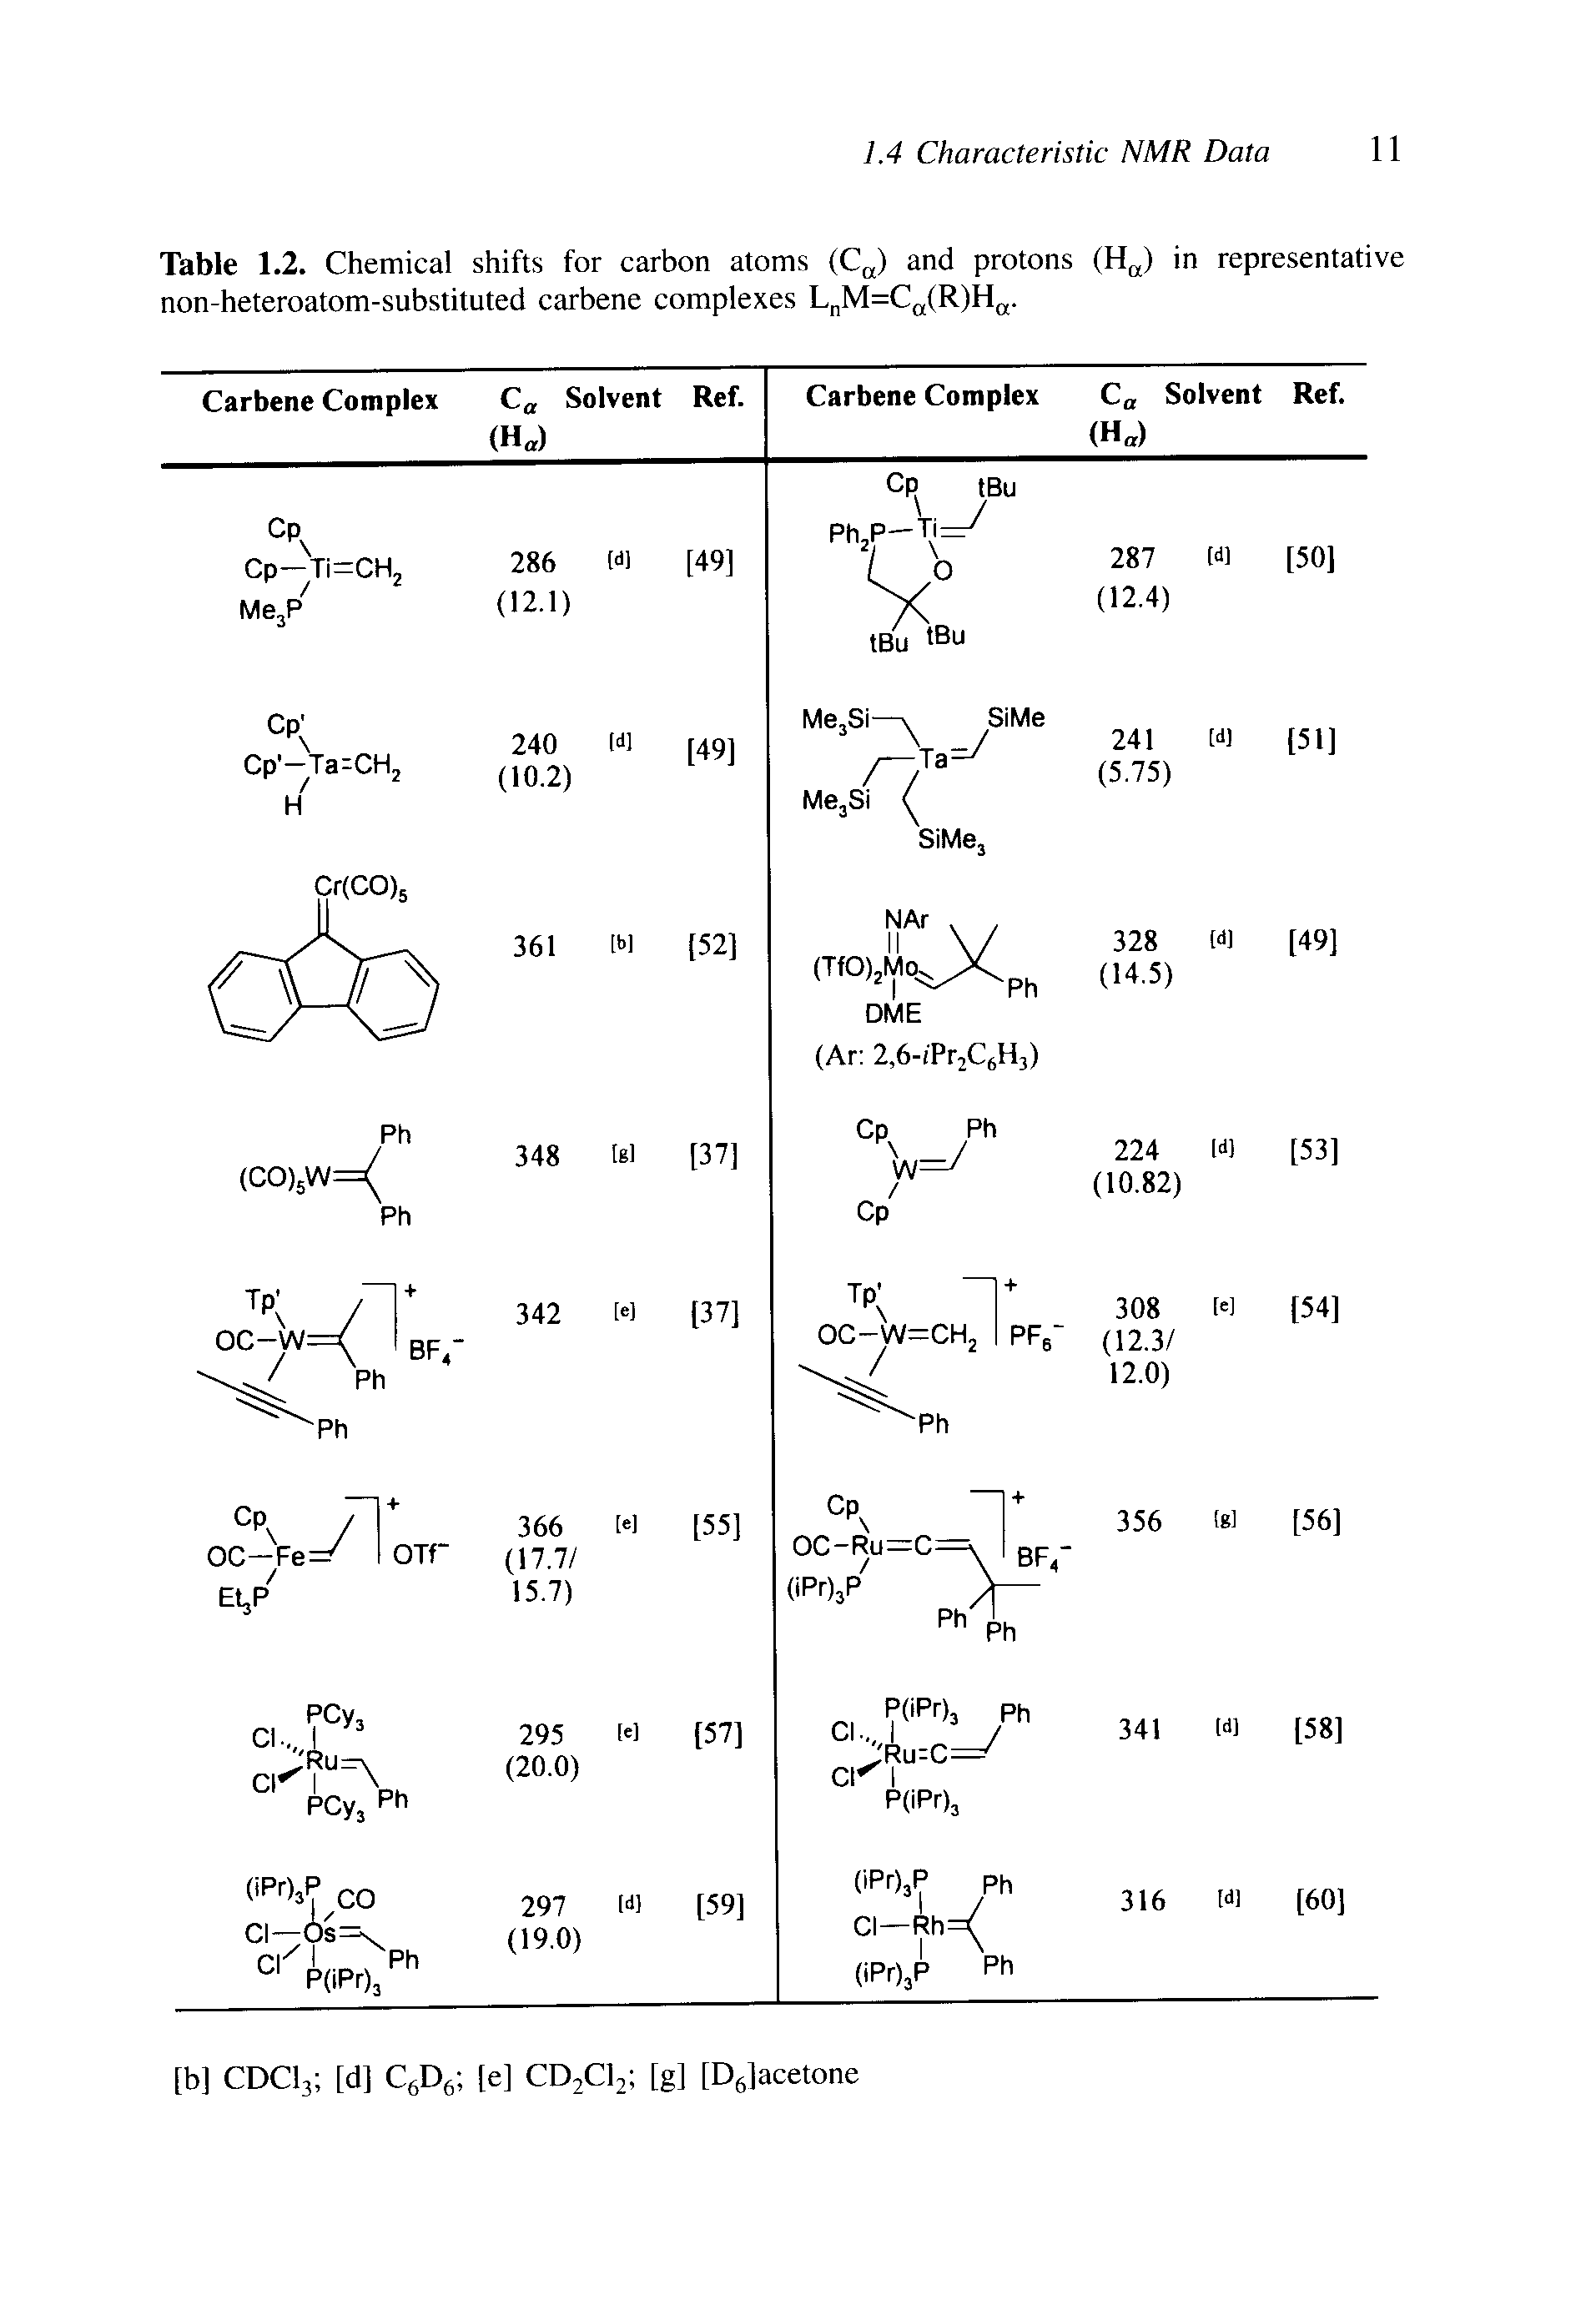 Table 1.2. Chemical shifts for carbon atoms (C ) and protons (H ) in representative non-heteroatom-substituted carbene complexes L M=C (R)H .